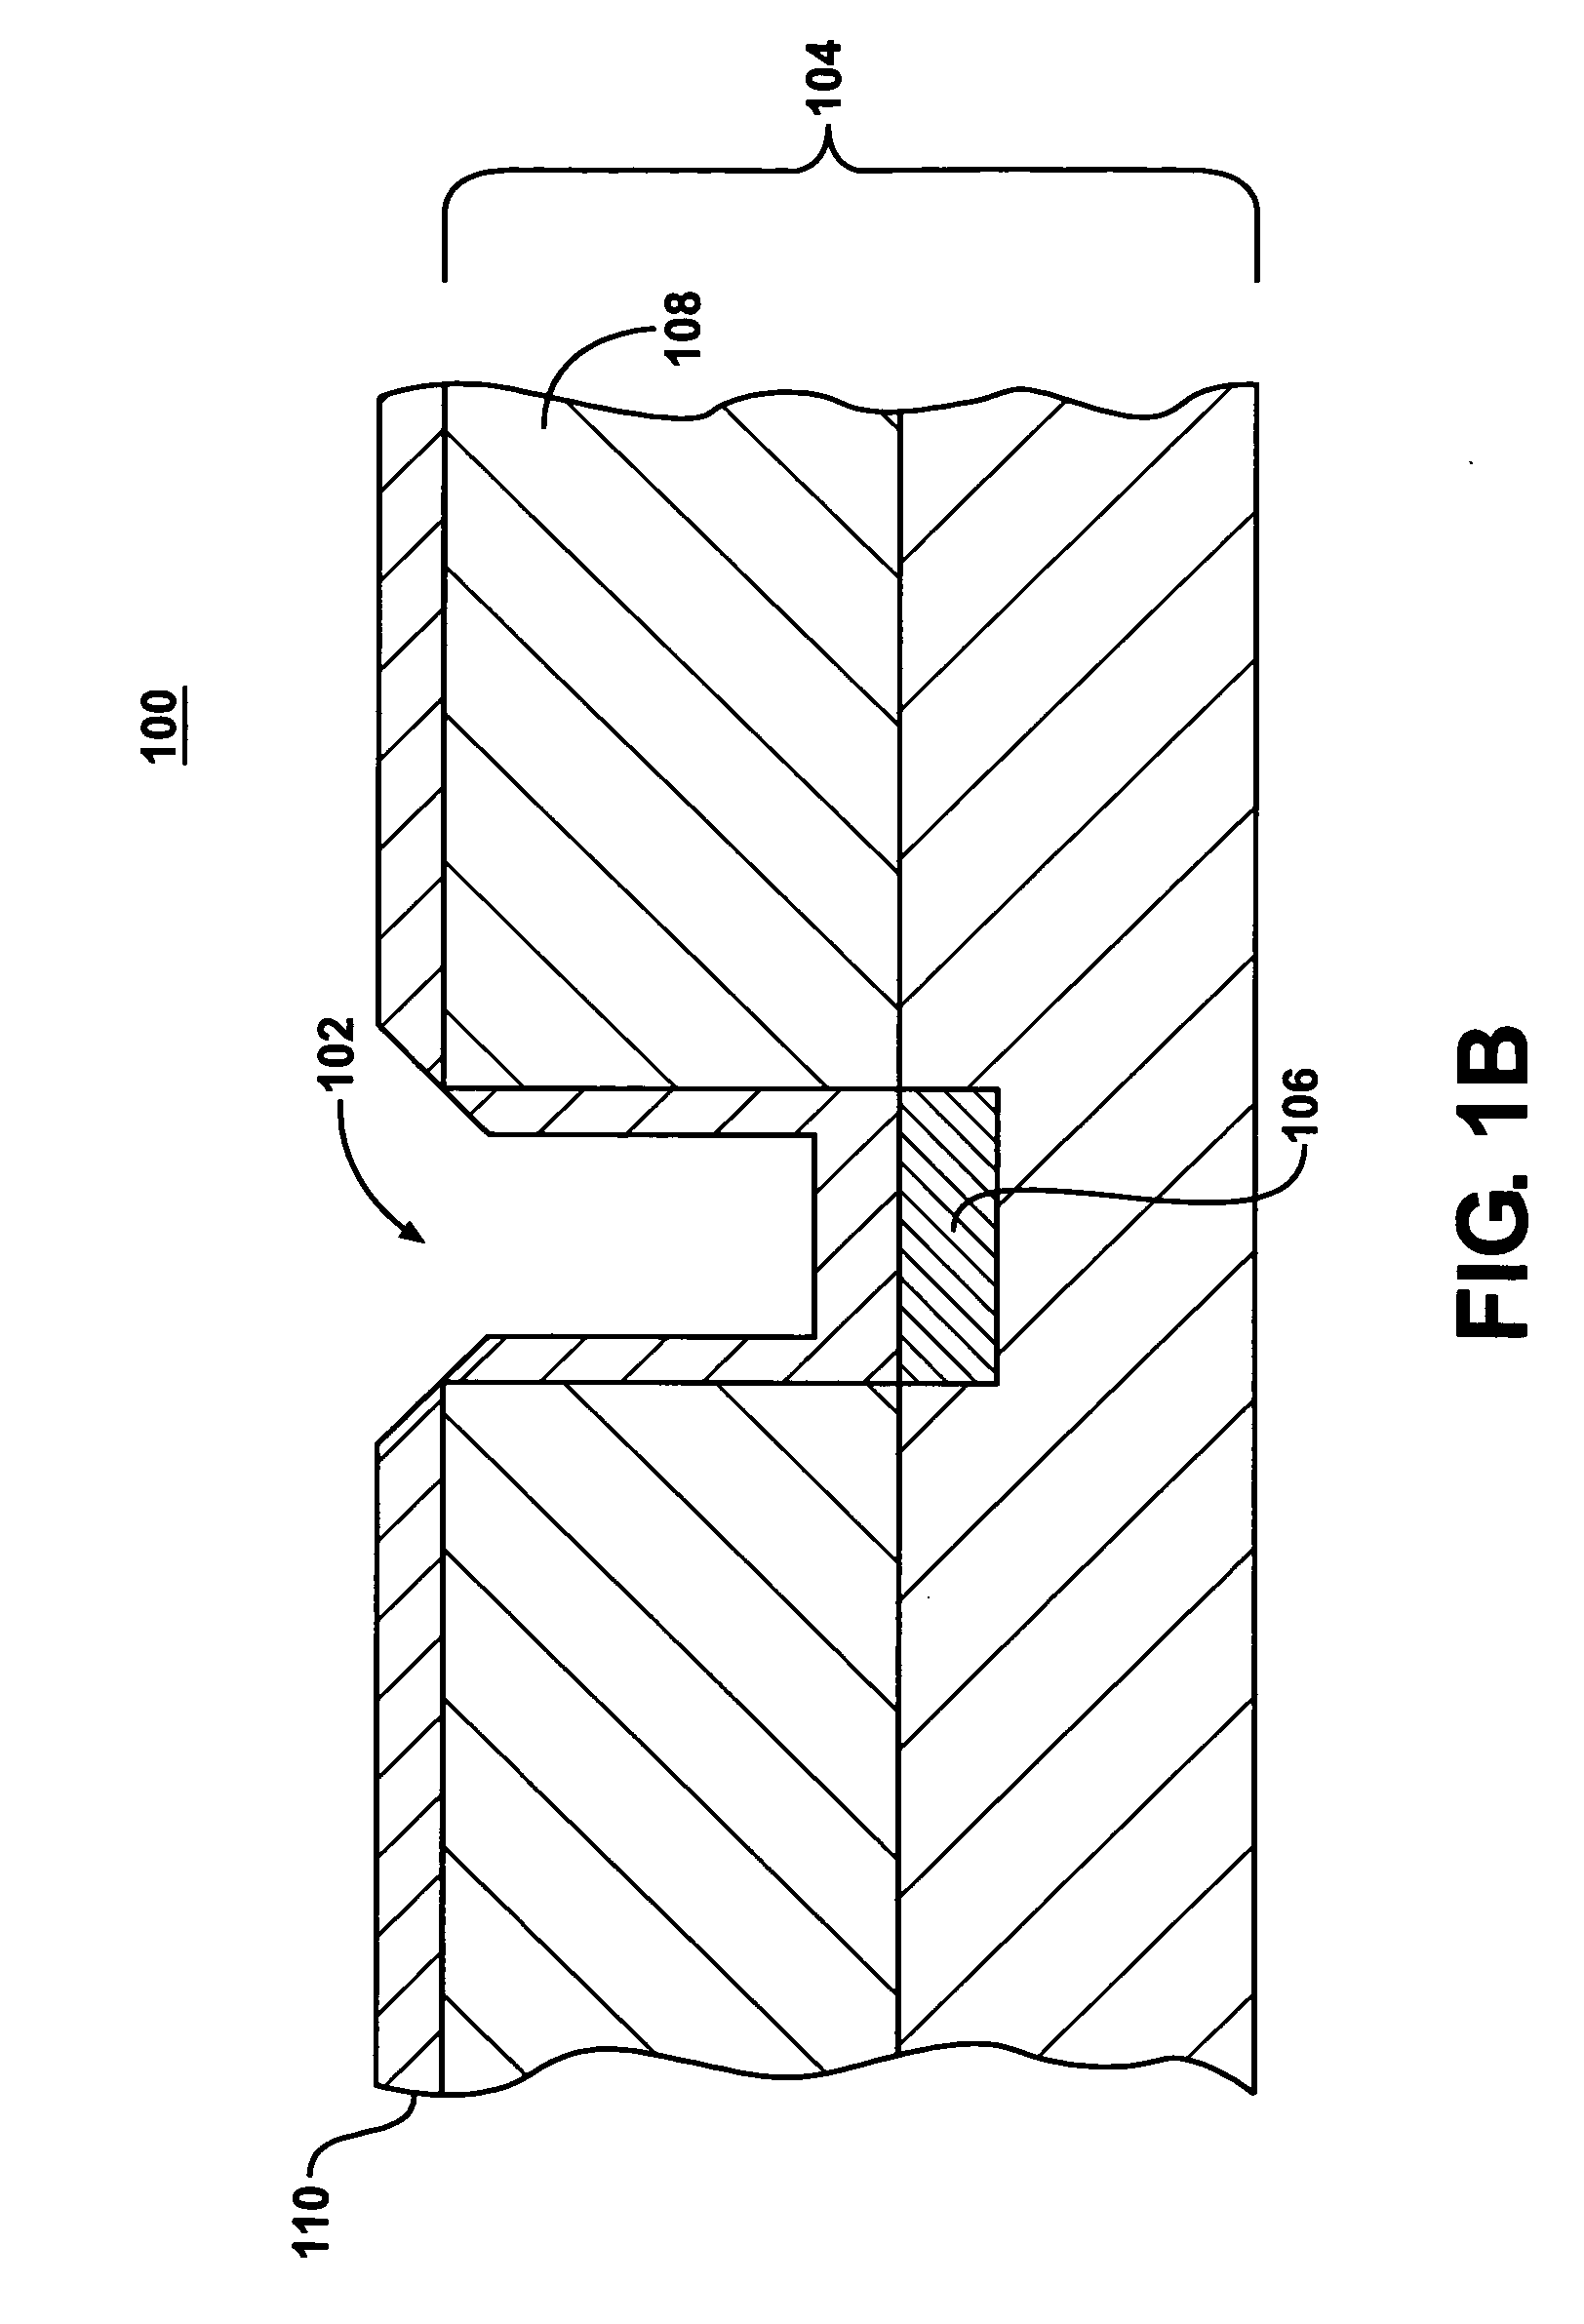 Programmable resistance memory and method of making same